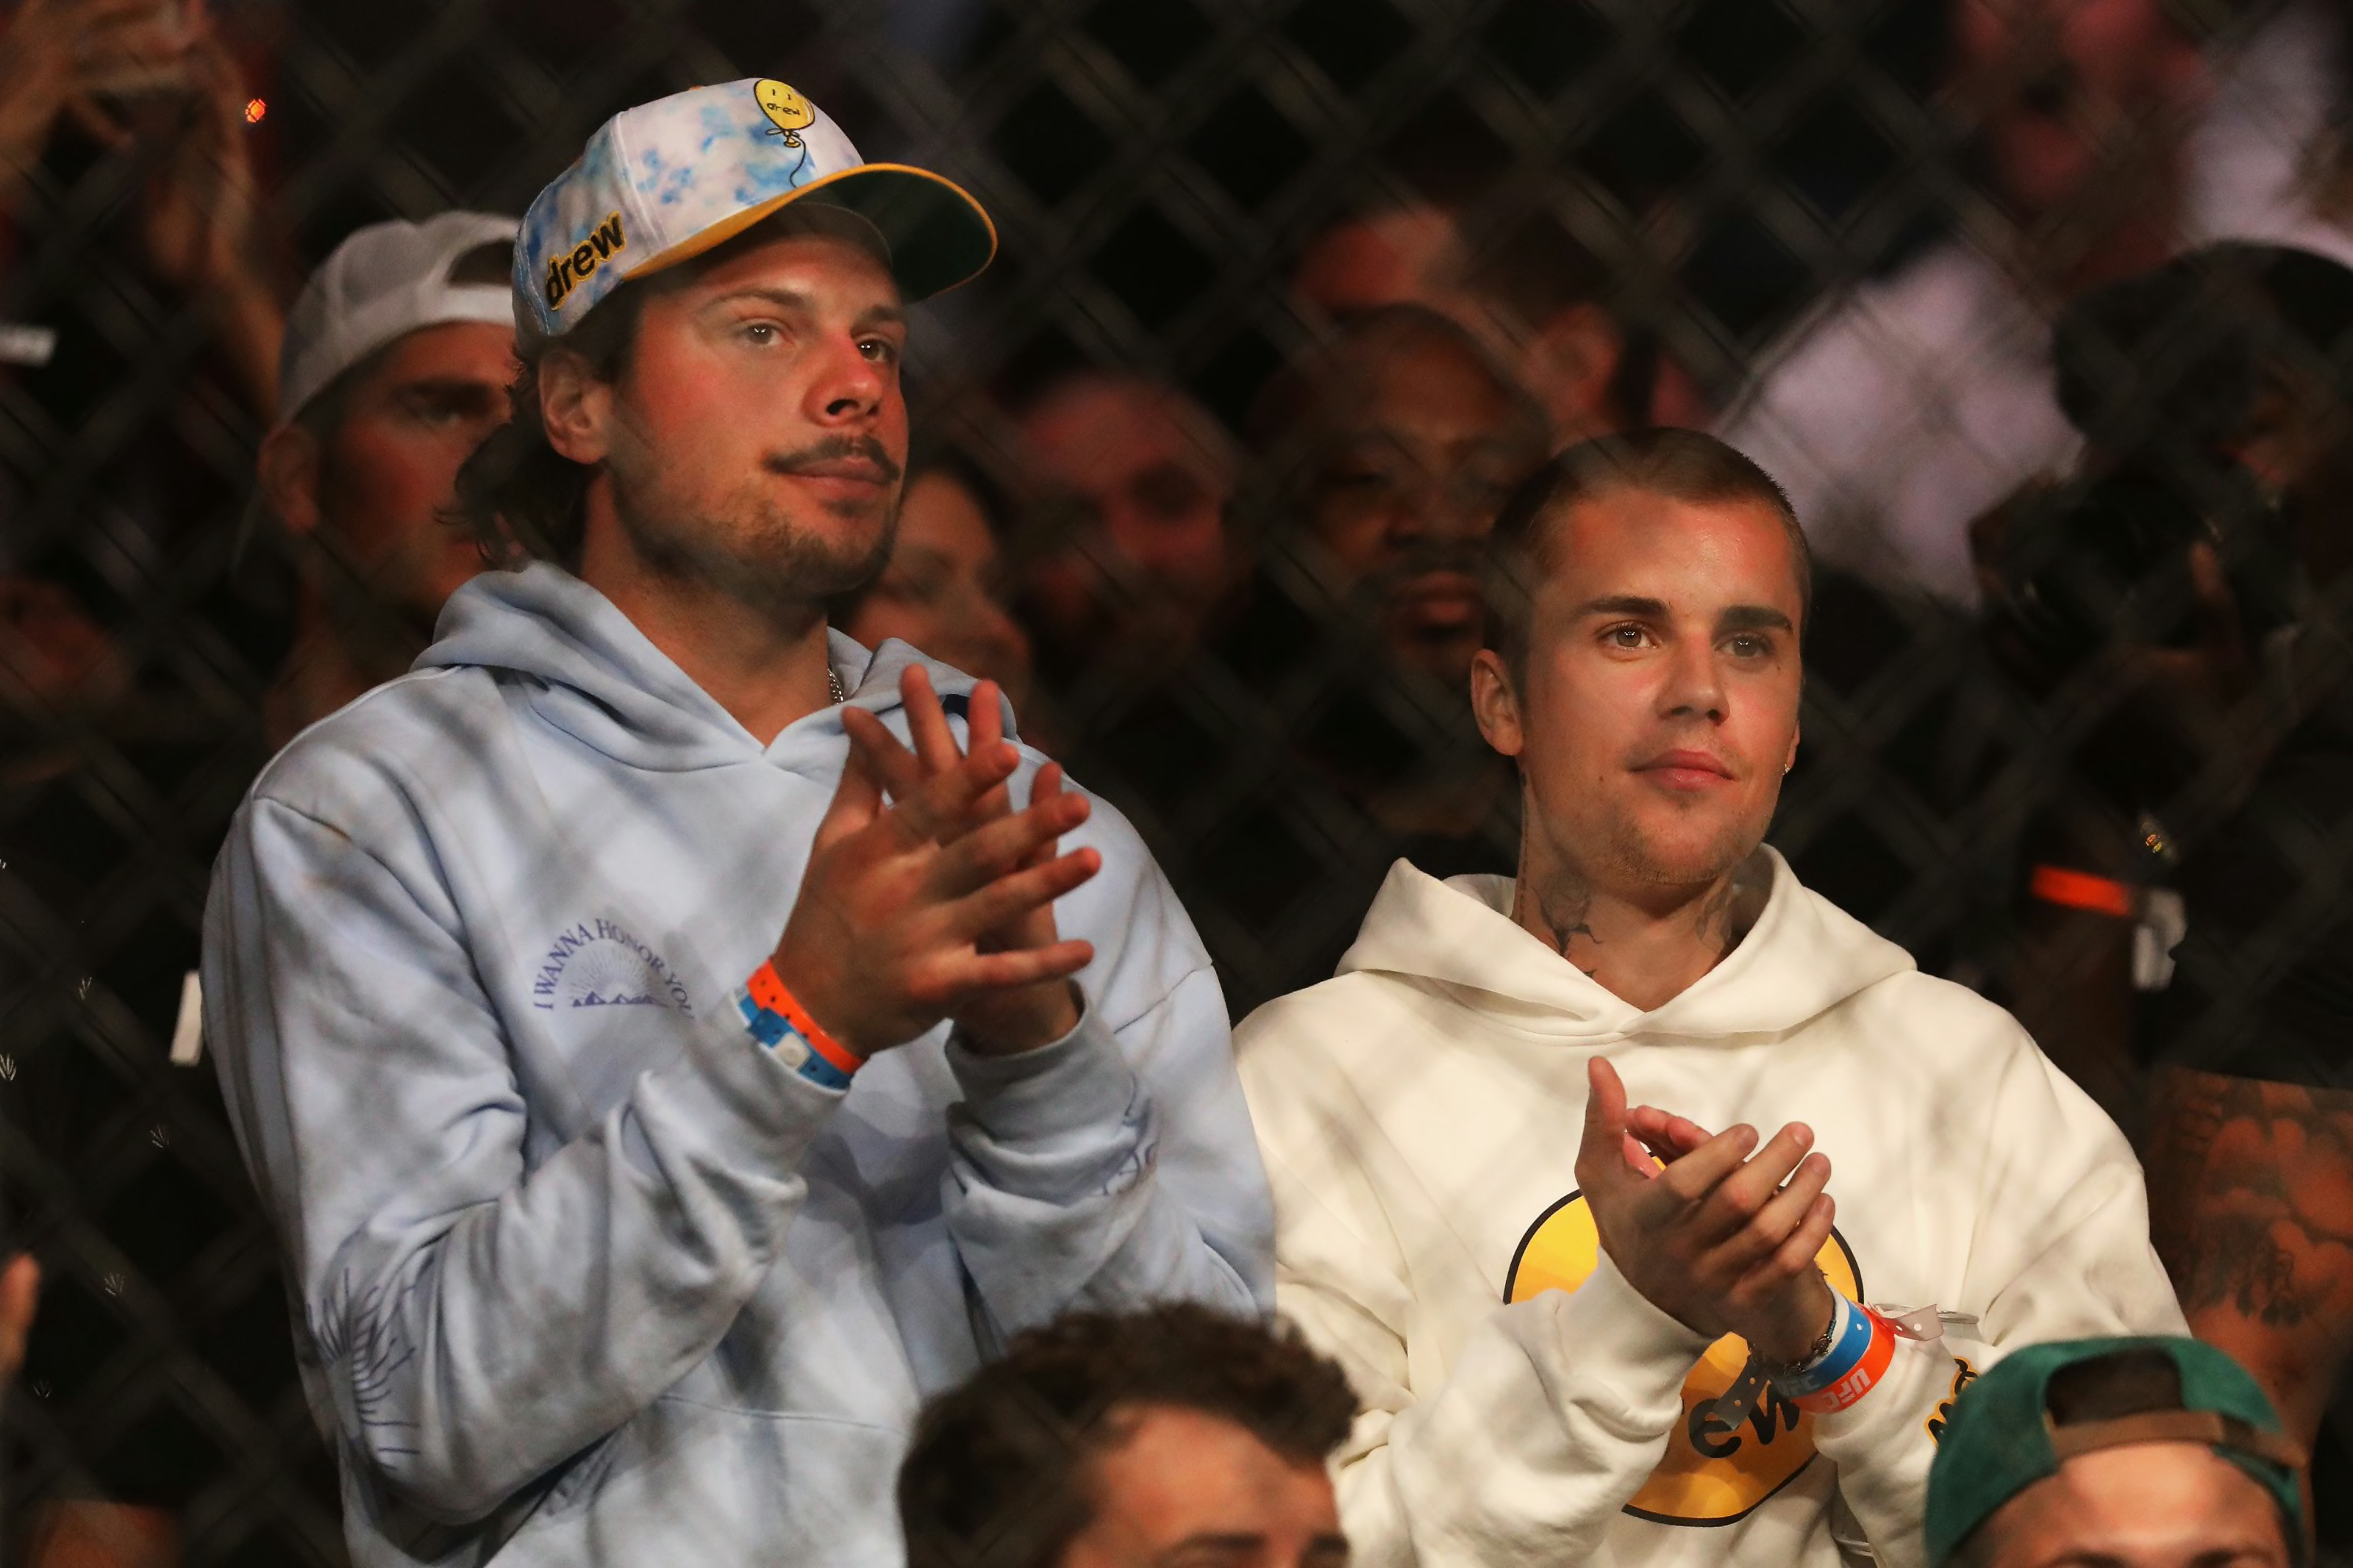 Justin Bieber says this is the year the Toronto Maple Leafs will